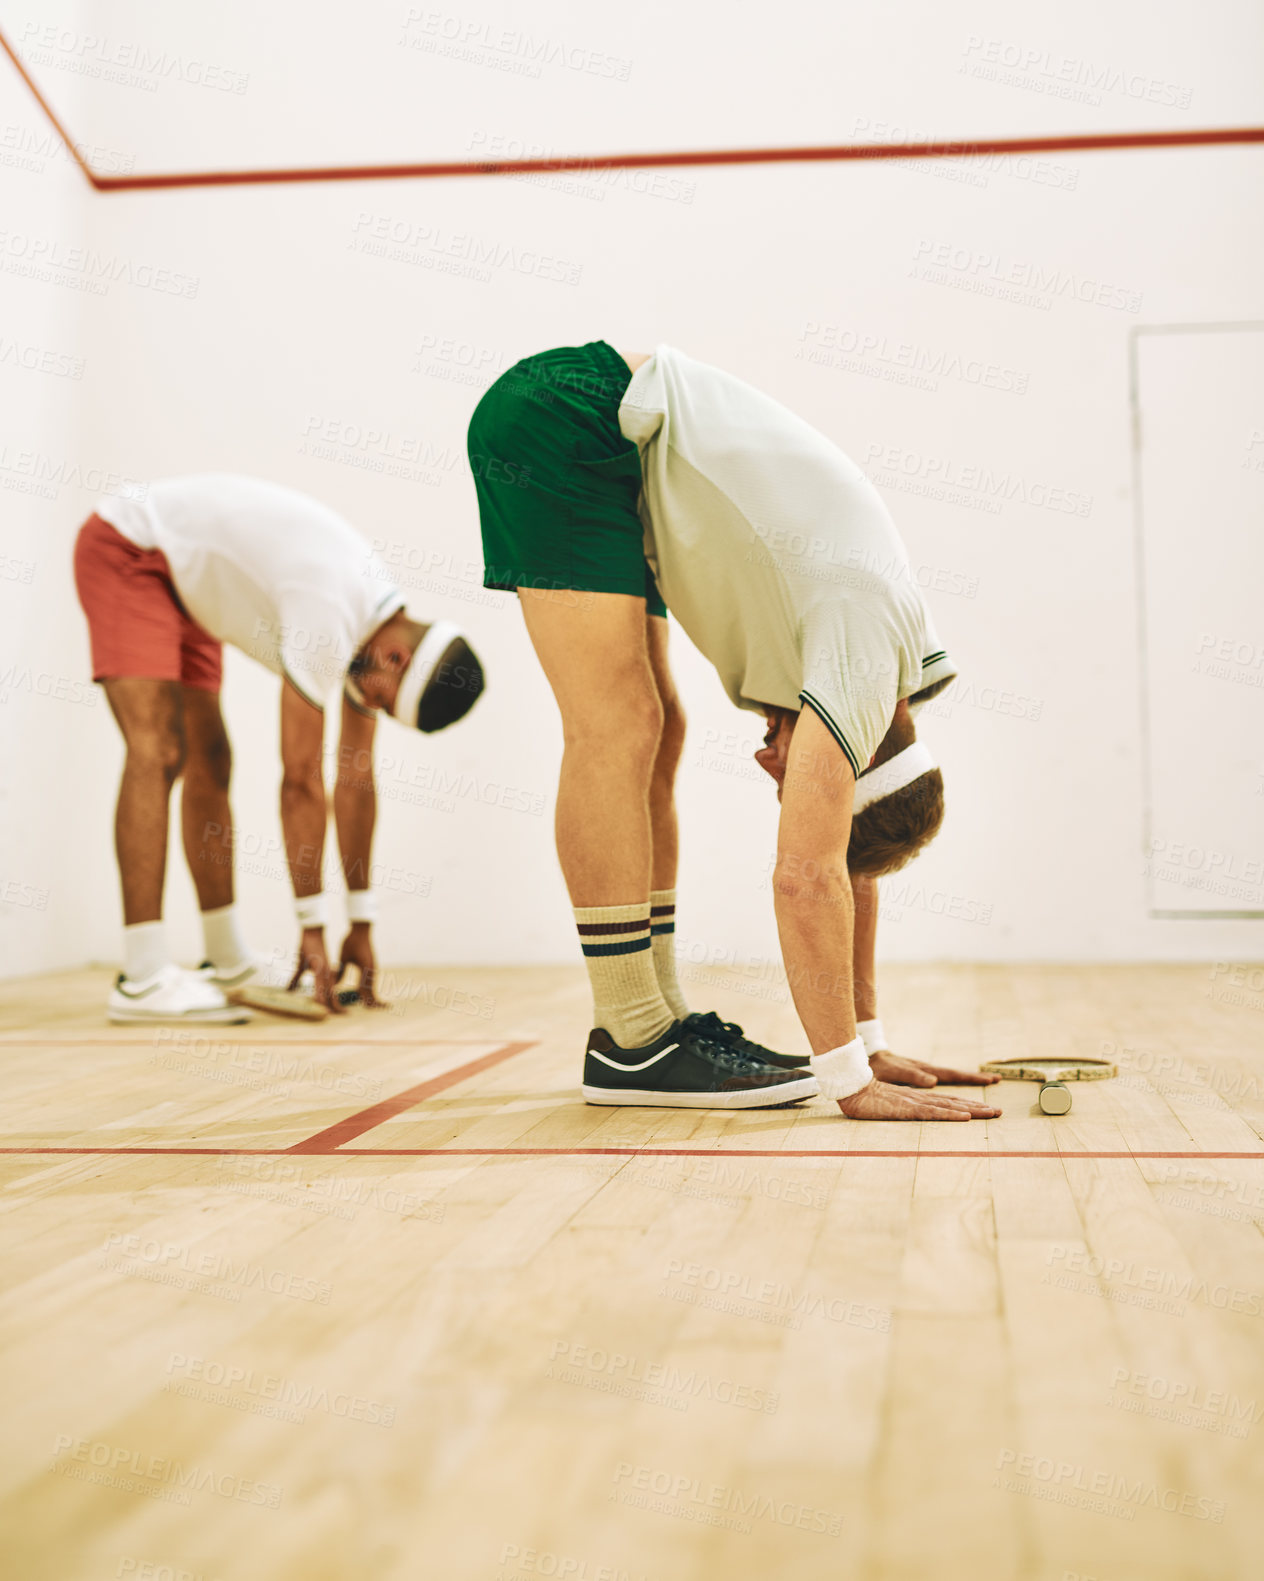 Buy stock photo Shot of two young men stretching before playing a game of squash